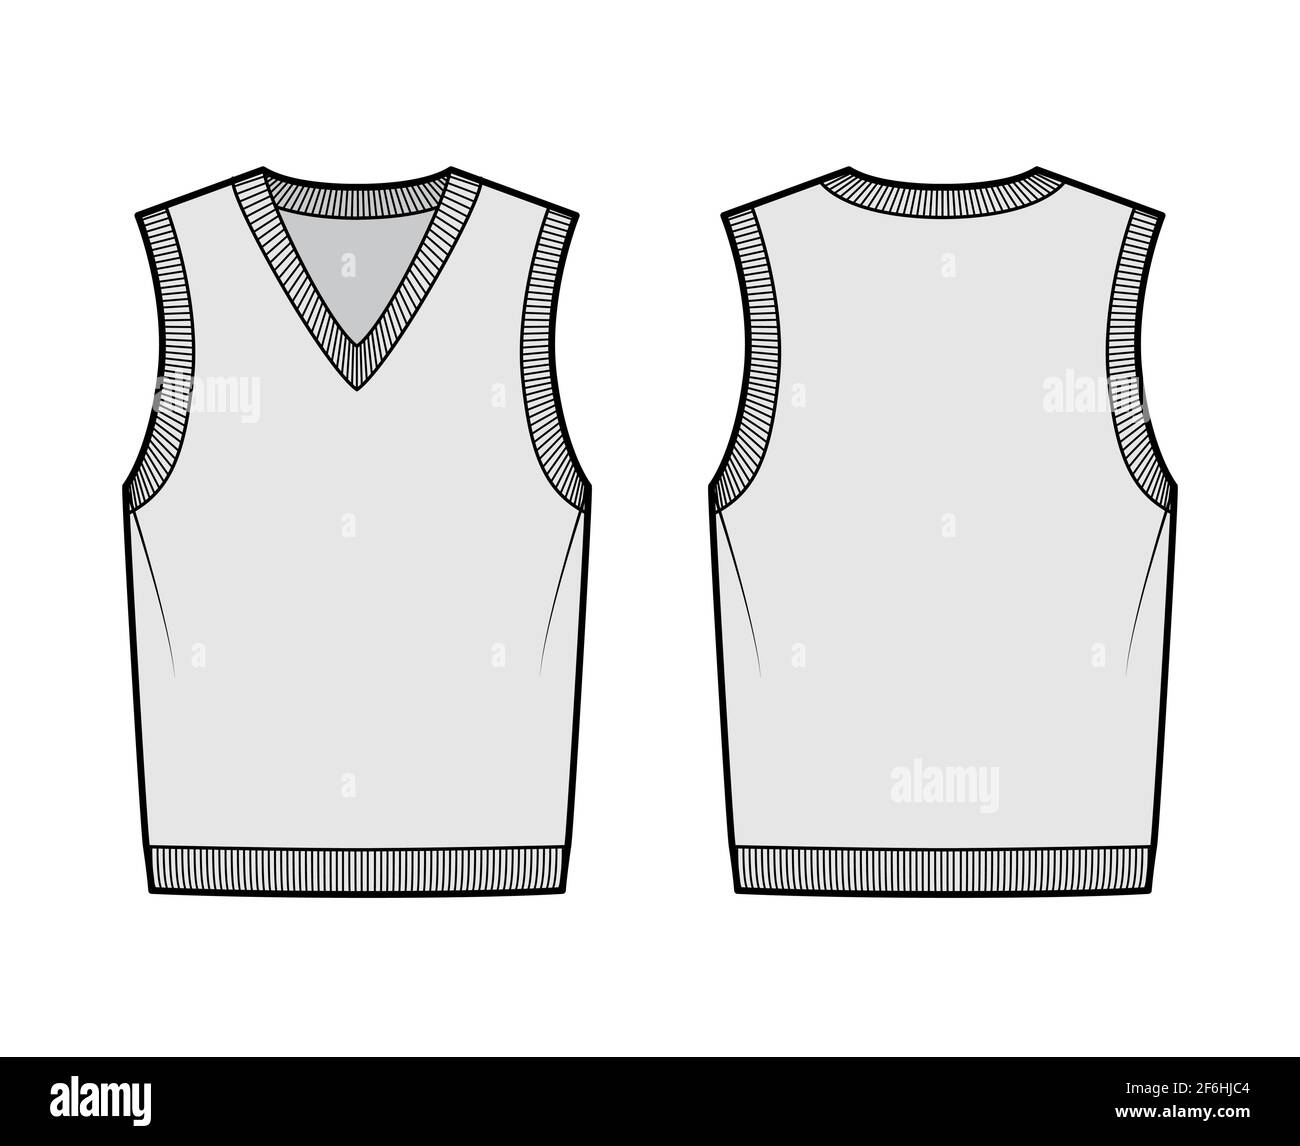 Pullover vest sweater waistcoat technical fashion illustration with sleeveless, rib knit V-neckline, oversized body. Flat template front, back, grey color style. Women, men, unisex top CAD mockup Stock Vector